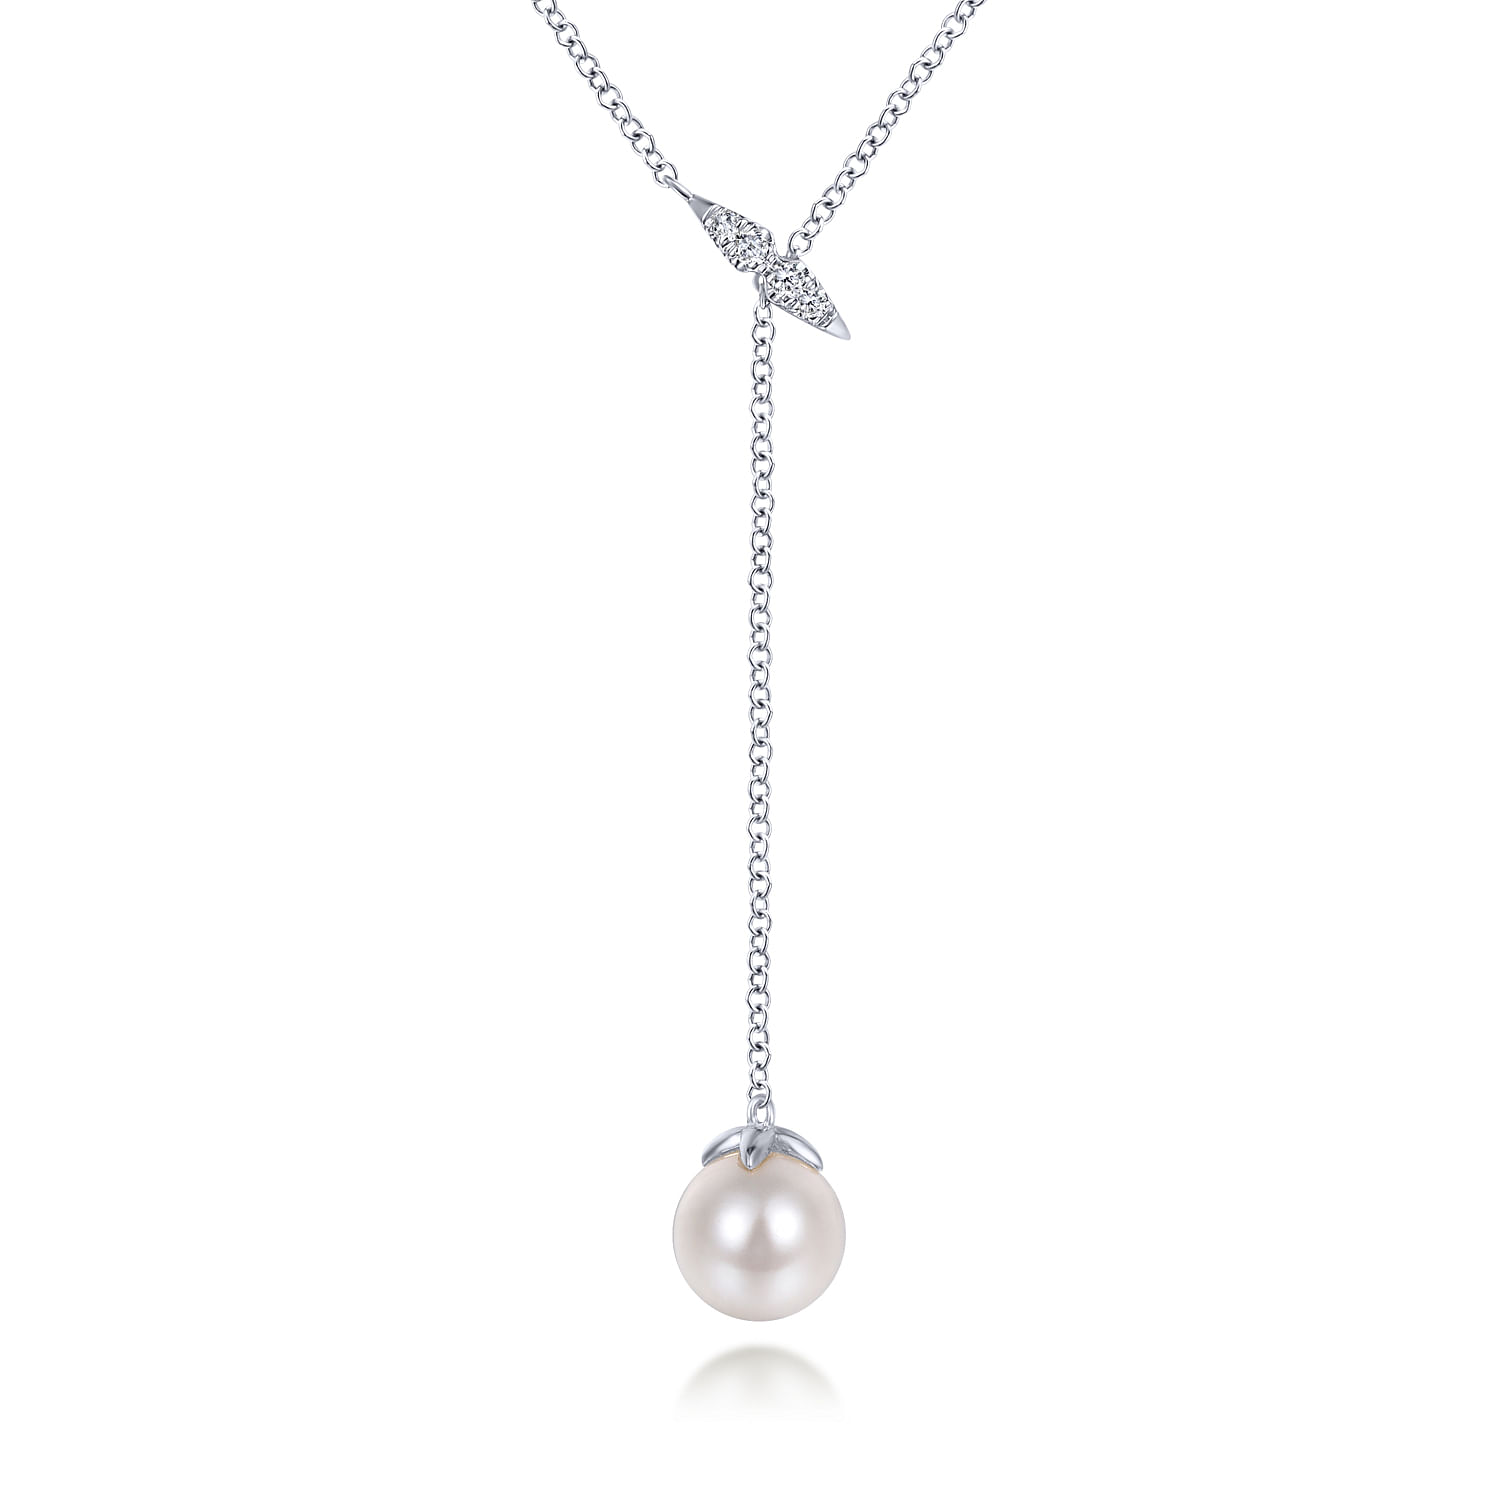 14K White Gold Diamond Bar Y Necklace with Cultured Pearl Drop